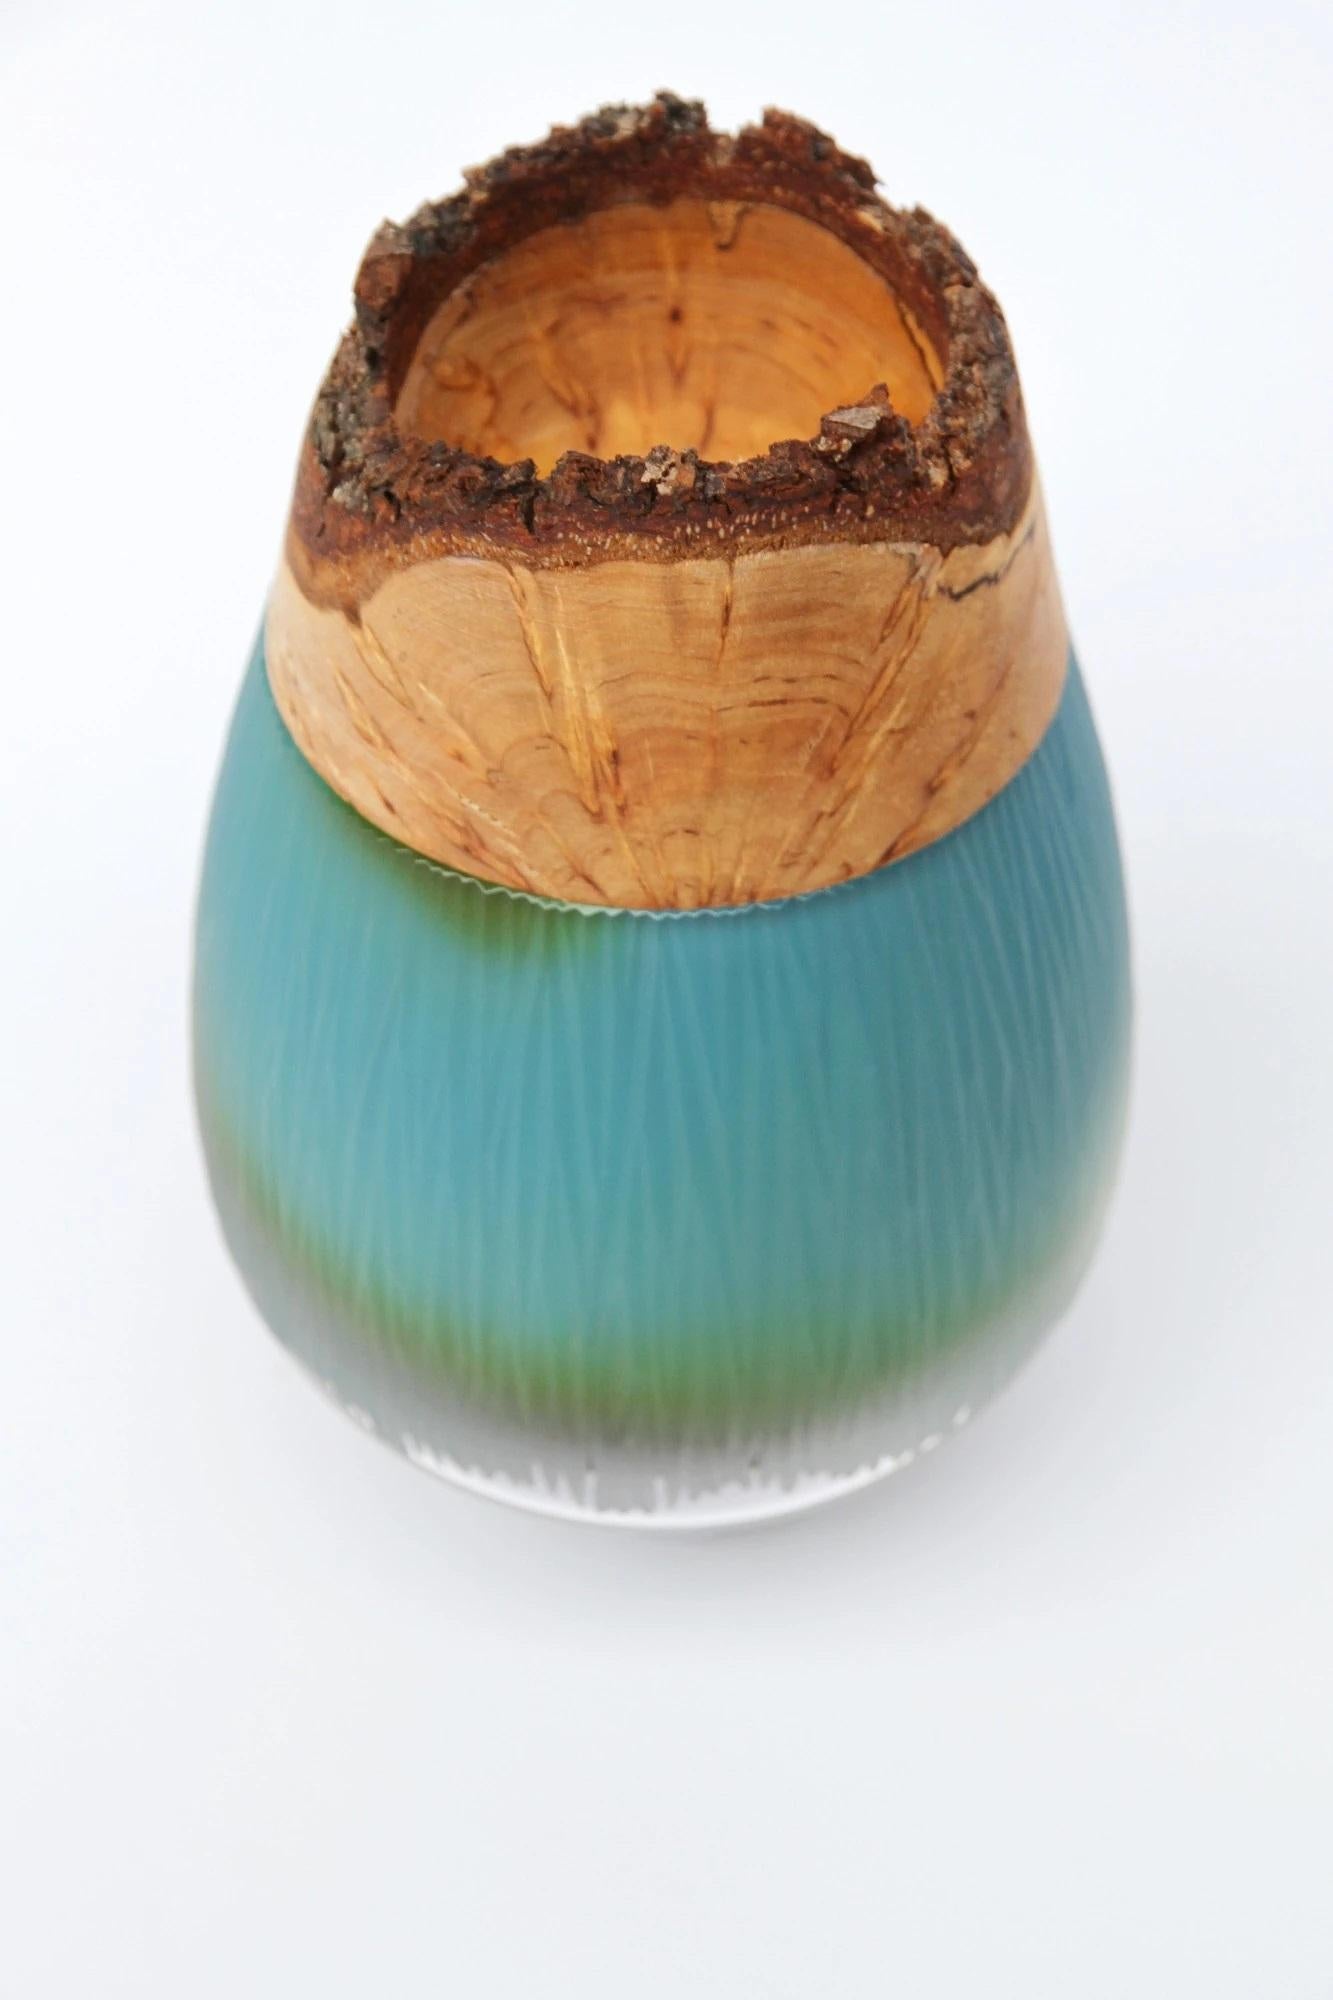 Ocean Frida with fine cuts stacking vessel, Pia Wüstenberg
Dimensions: D 13 x H 20
Materials: cut glass, wood
Available in other colors.

With its sculpted glass topped by Curly Birch, Poppy is an exquisite vessel. This delightful piece finds